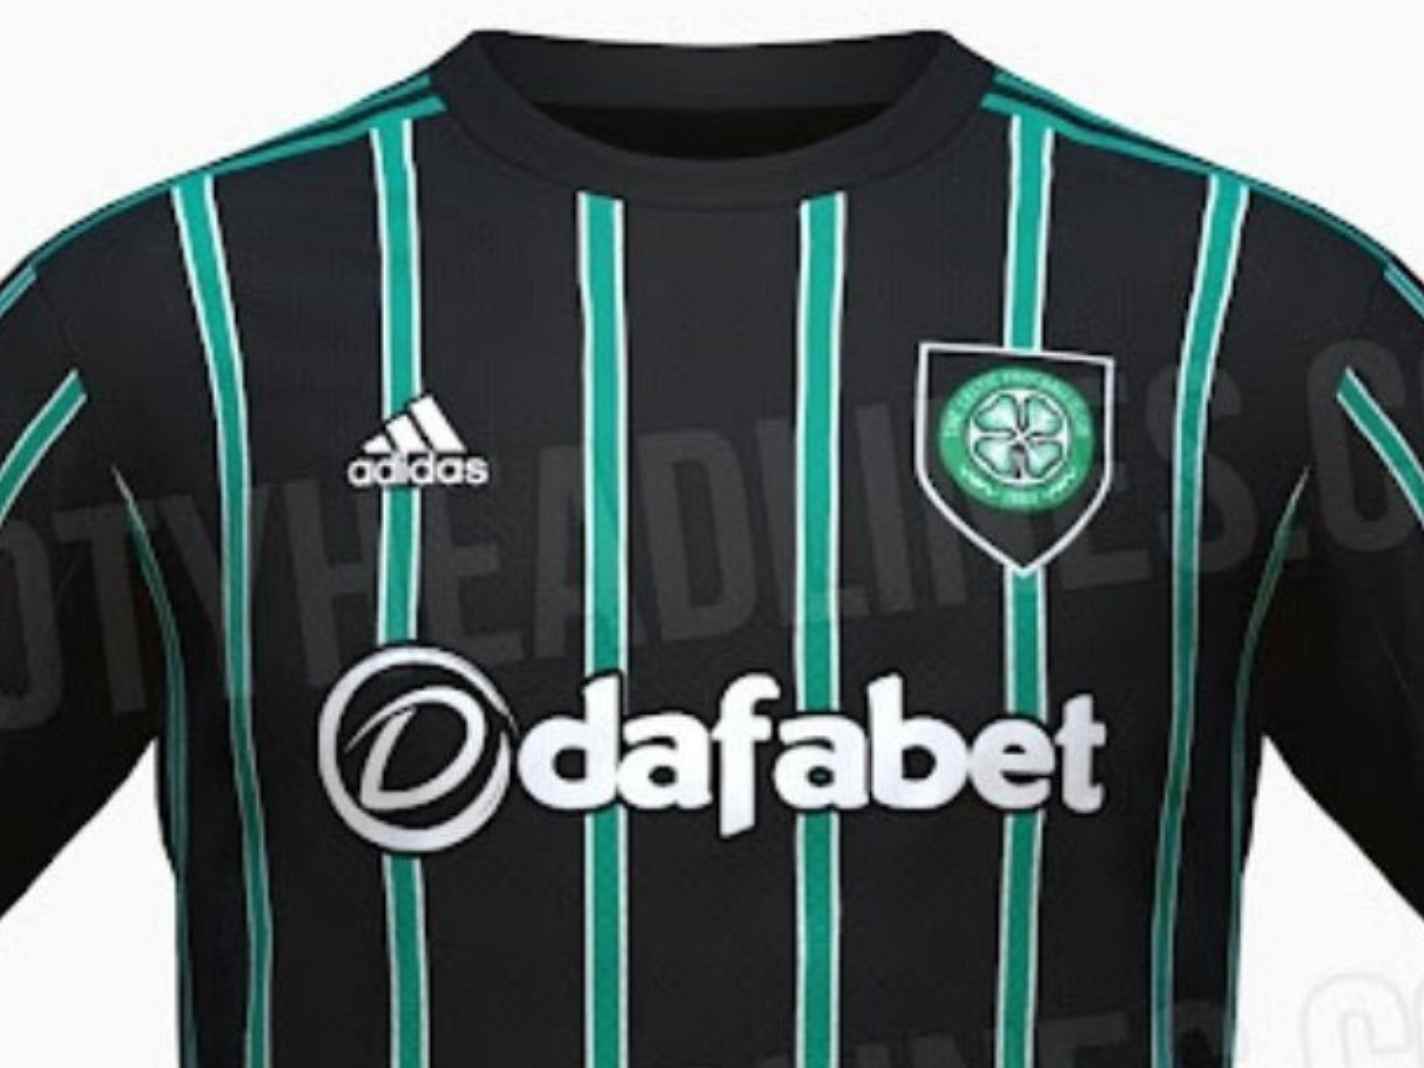 In this image - Possible Celtic away kit for 2223 season